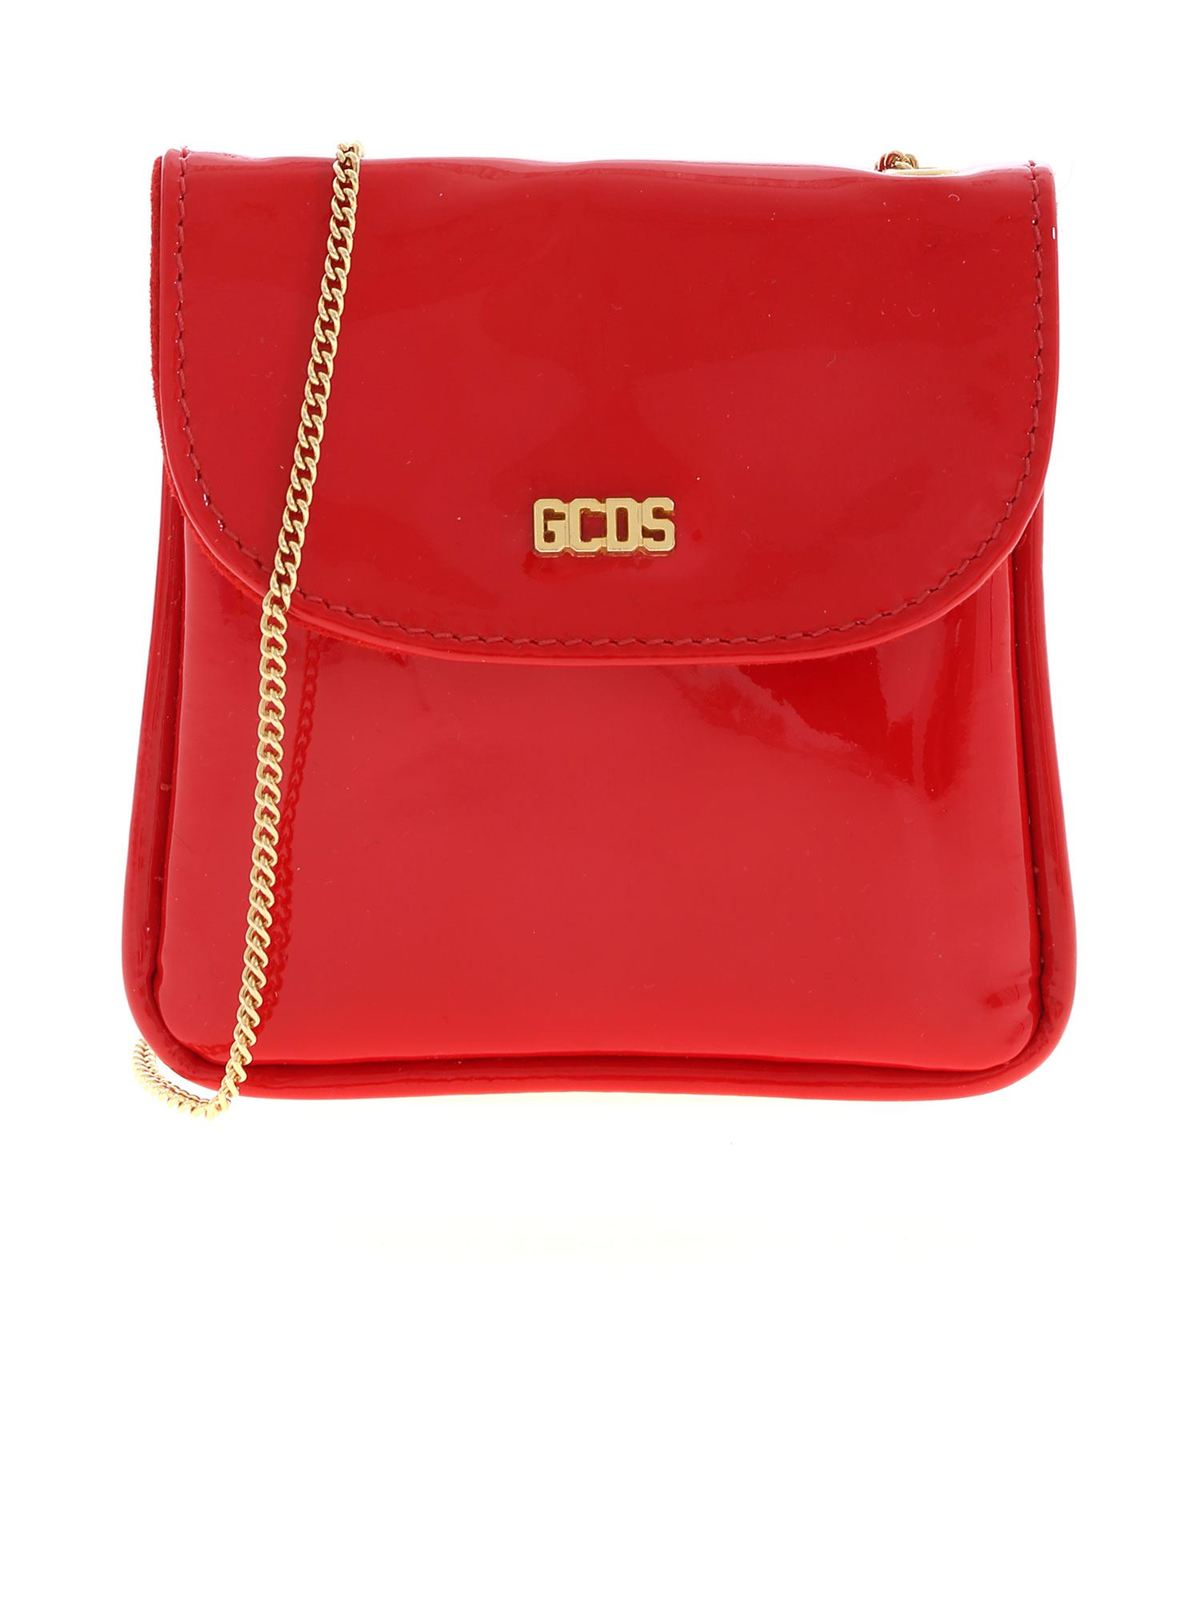 Gcds Bling Coin Purse In Red